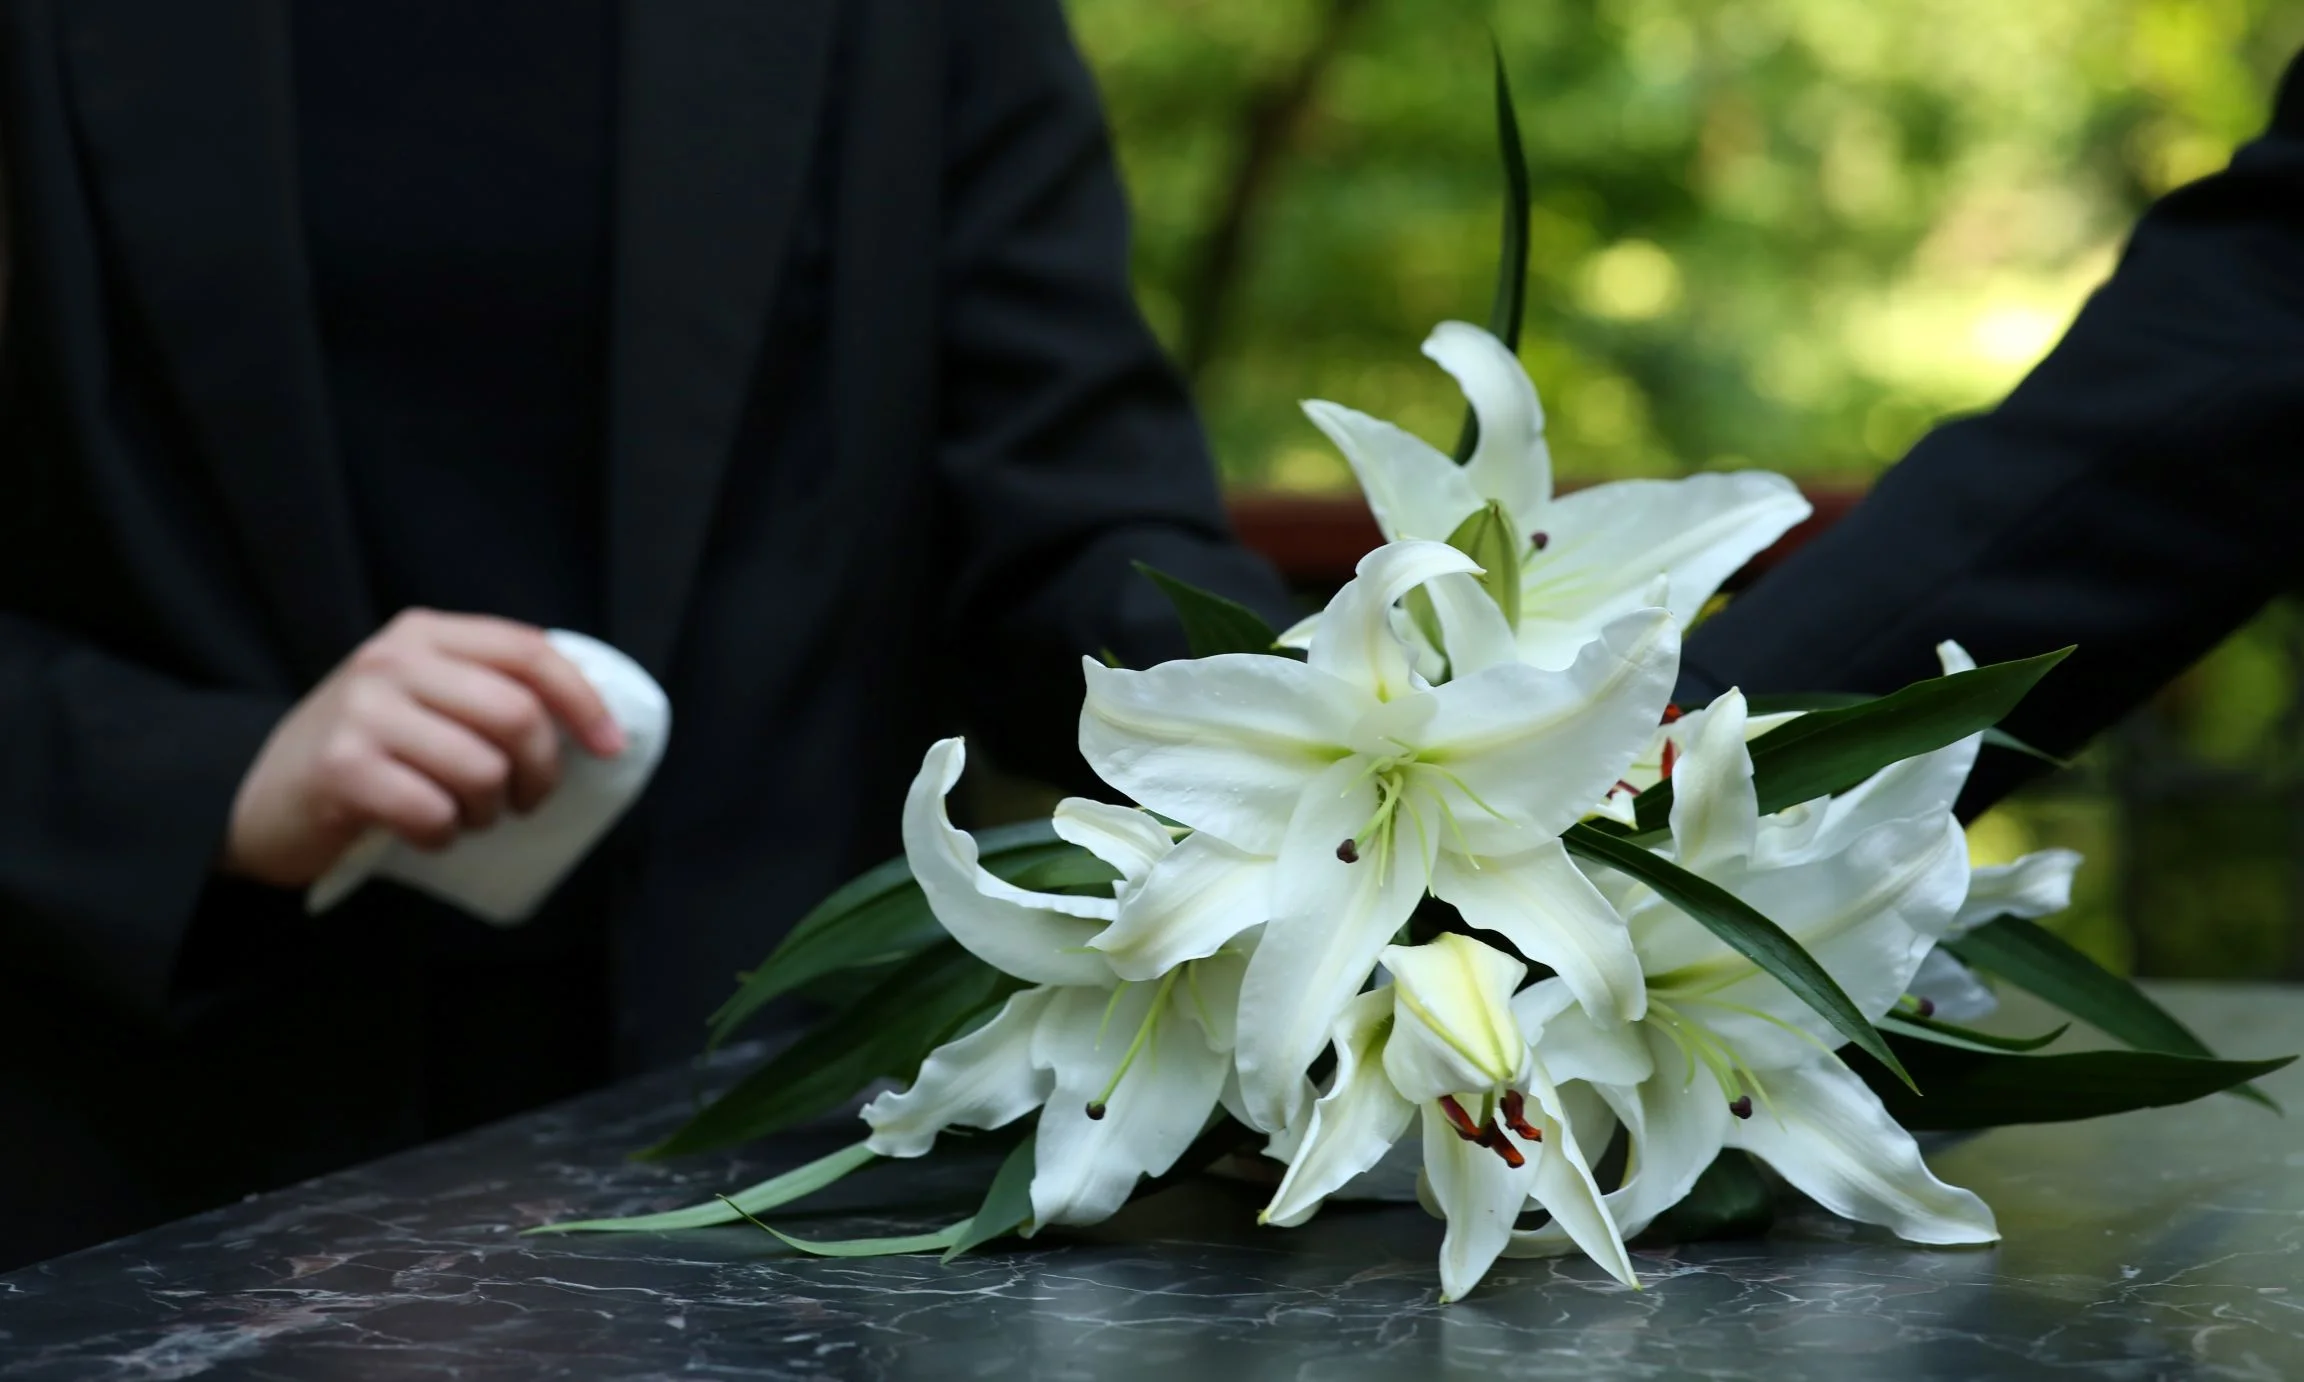 White flowers on top of an accident victim's casket with loved ones gathered around.